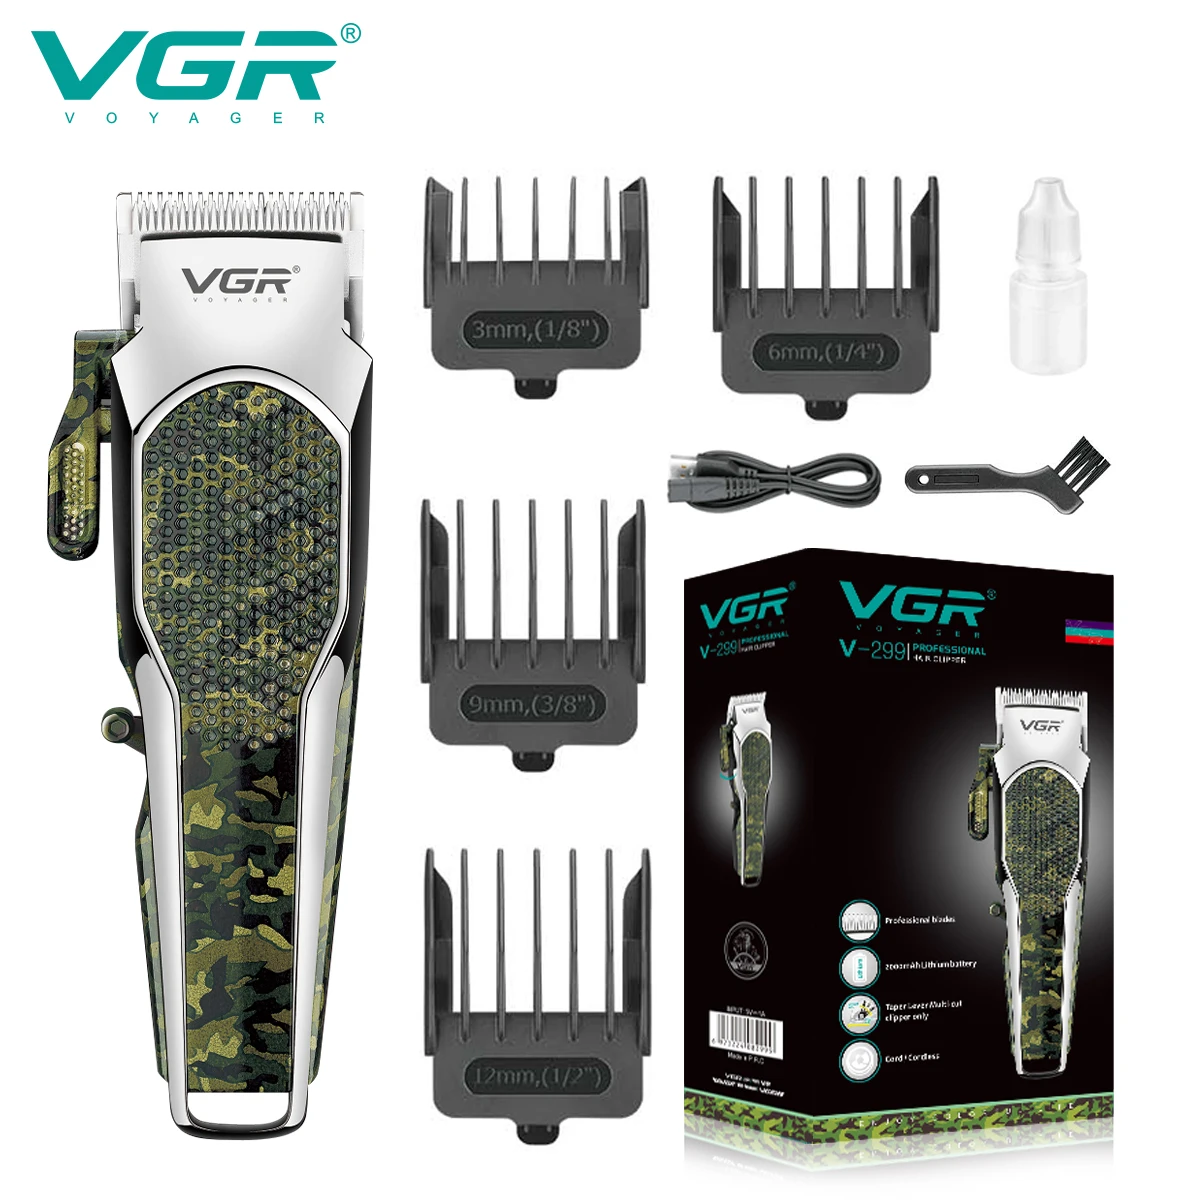 VGR Hair Trimmer Camo Hair Clipper Professional Haircut Machine Digital Display Electric Adjustable Trimmers for Men V-299